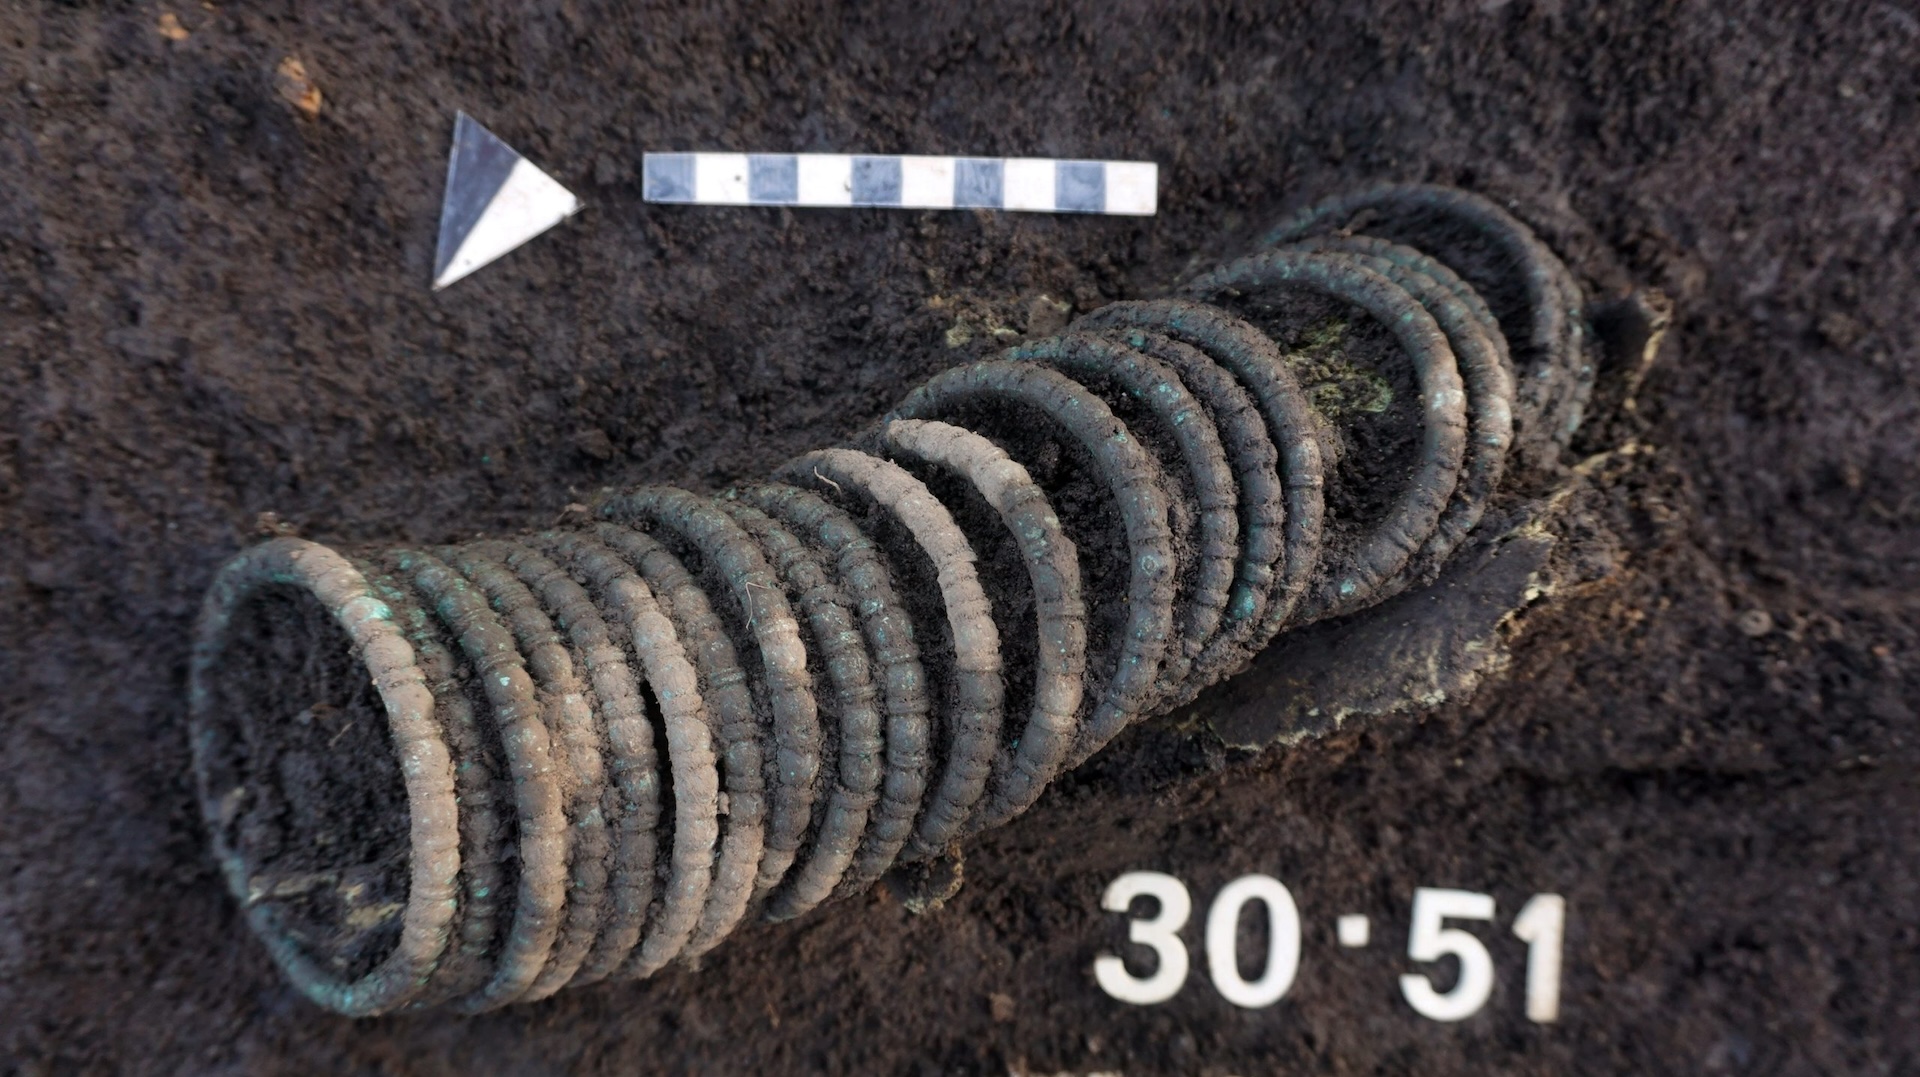 A row of about 20 bronze bracelets in the dirt burial.